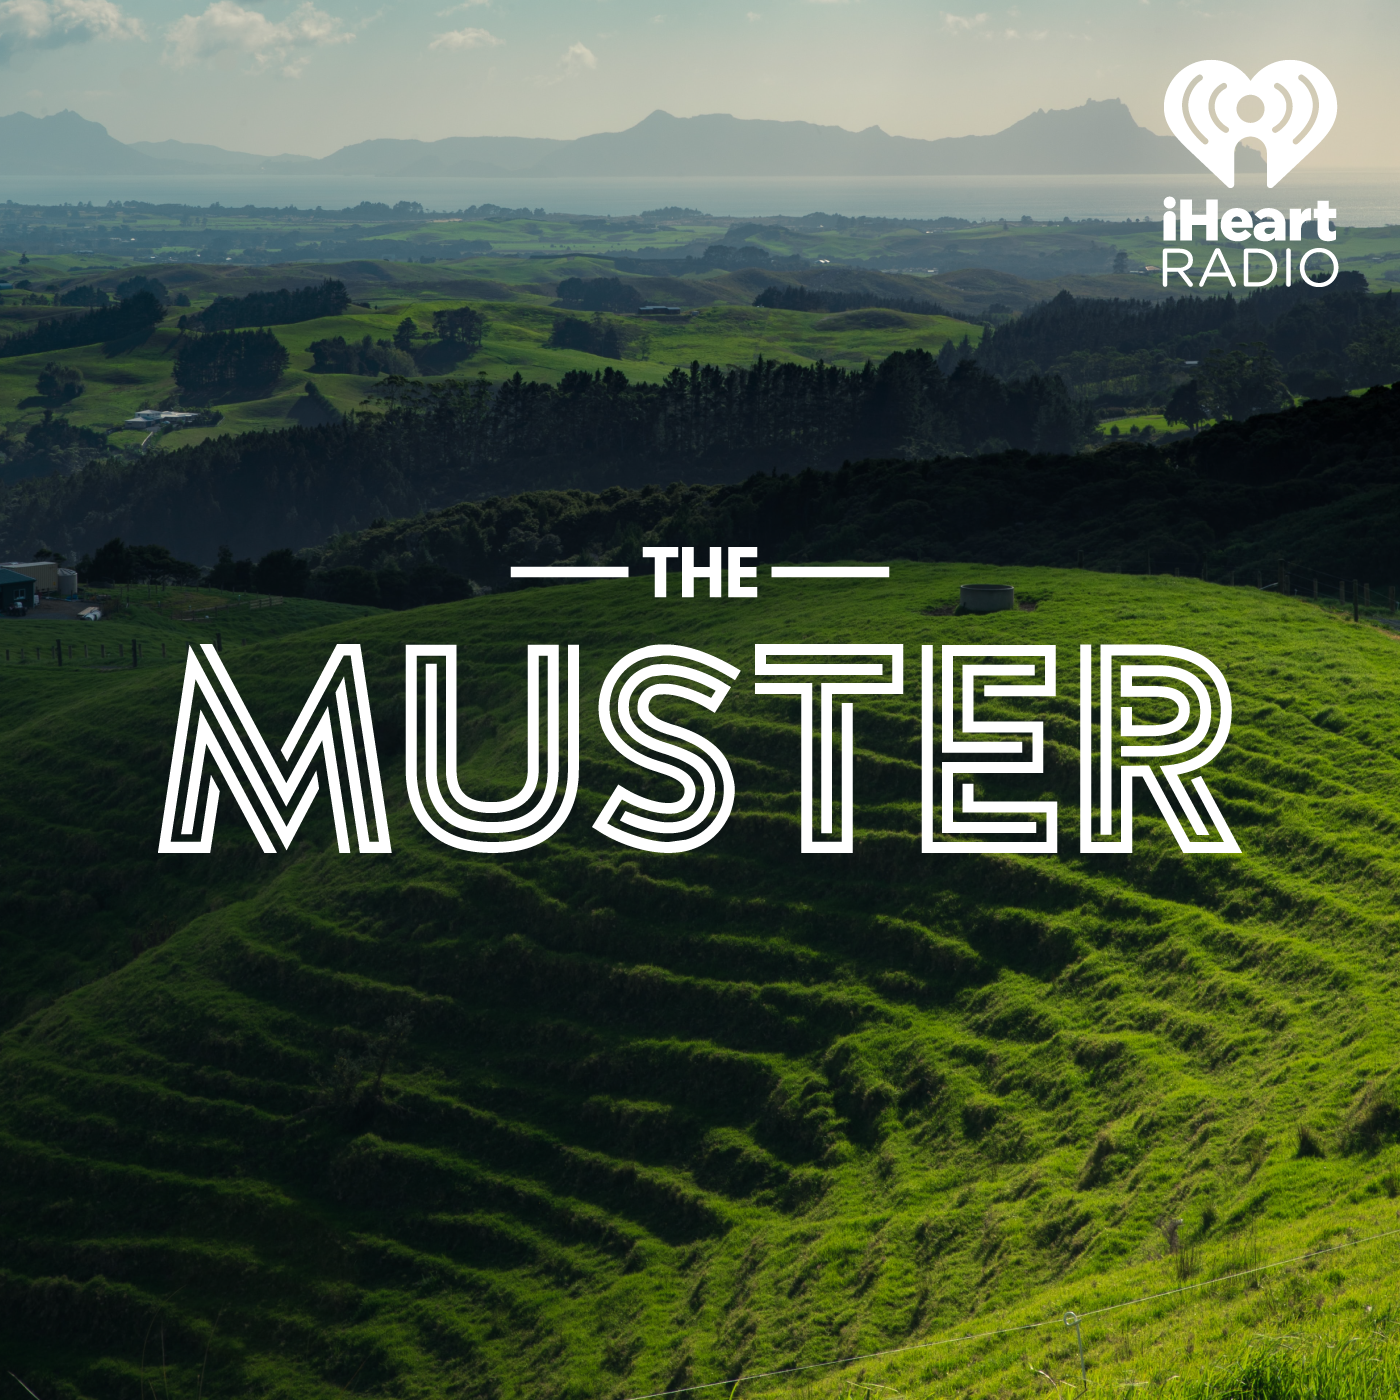 The Muster- David Stevens: Reflecting On A Successful Stag Sale